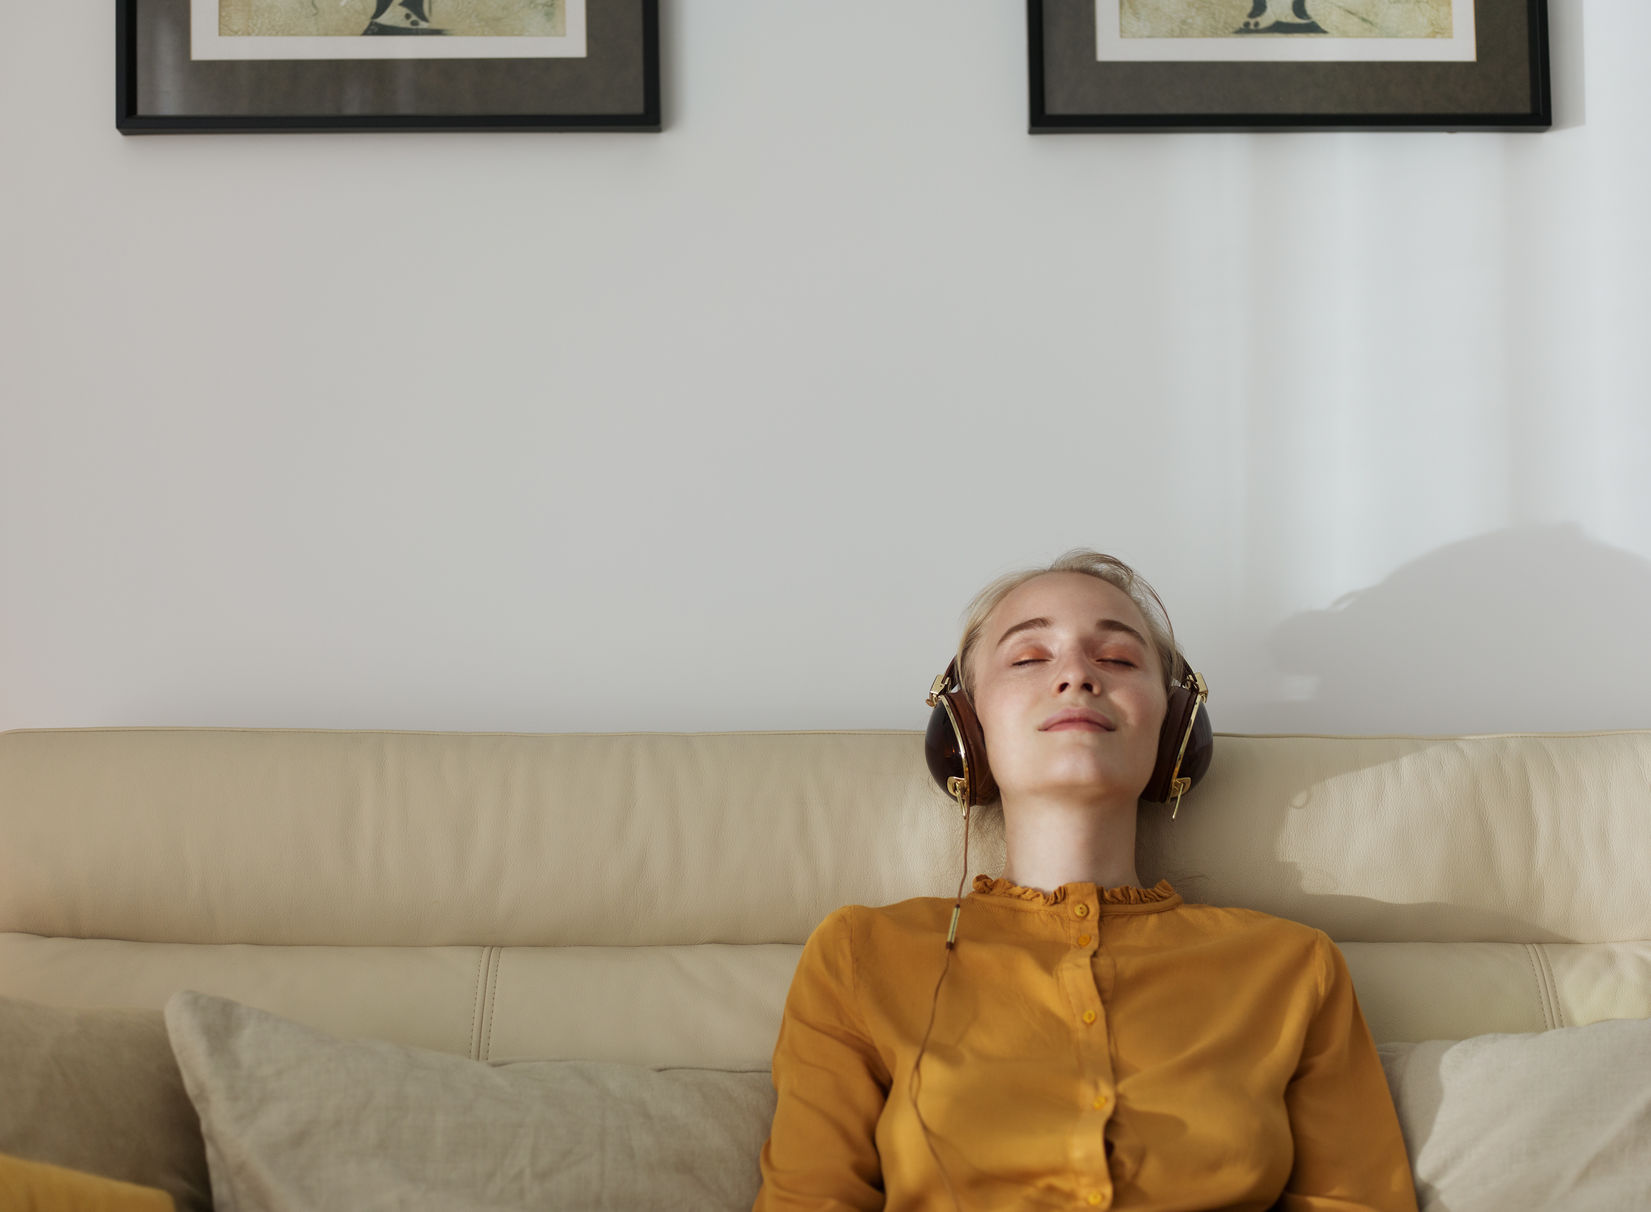 Young casual woman sitting on couch listening to music with earphones keeping eyes closed.